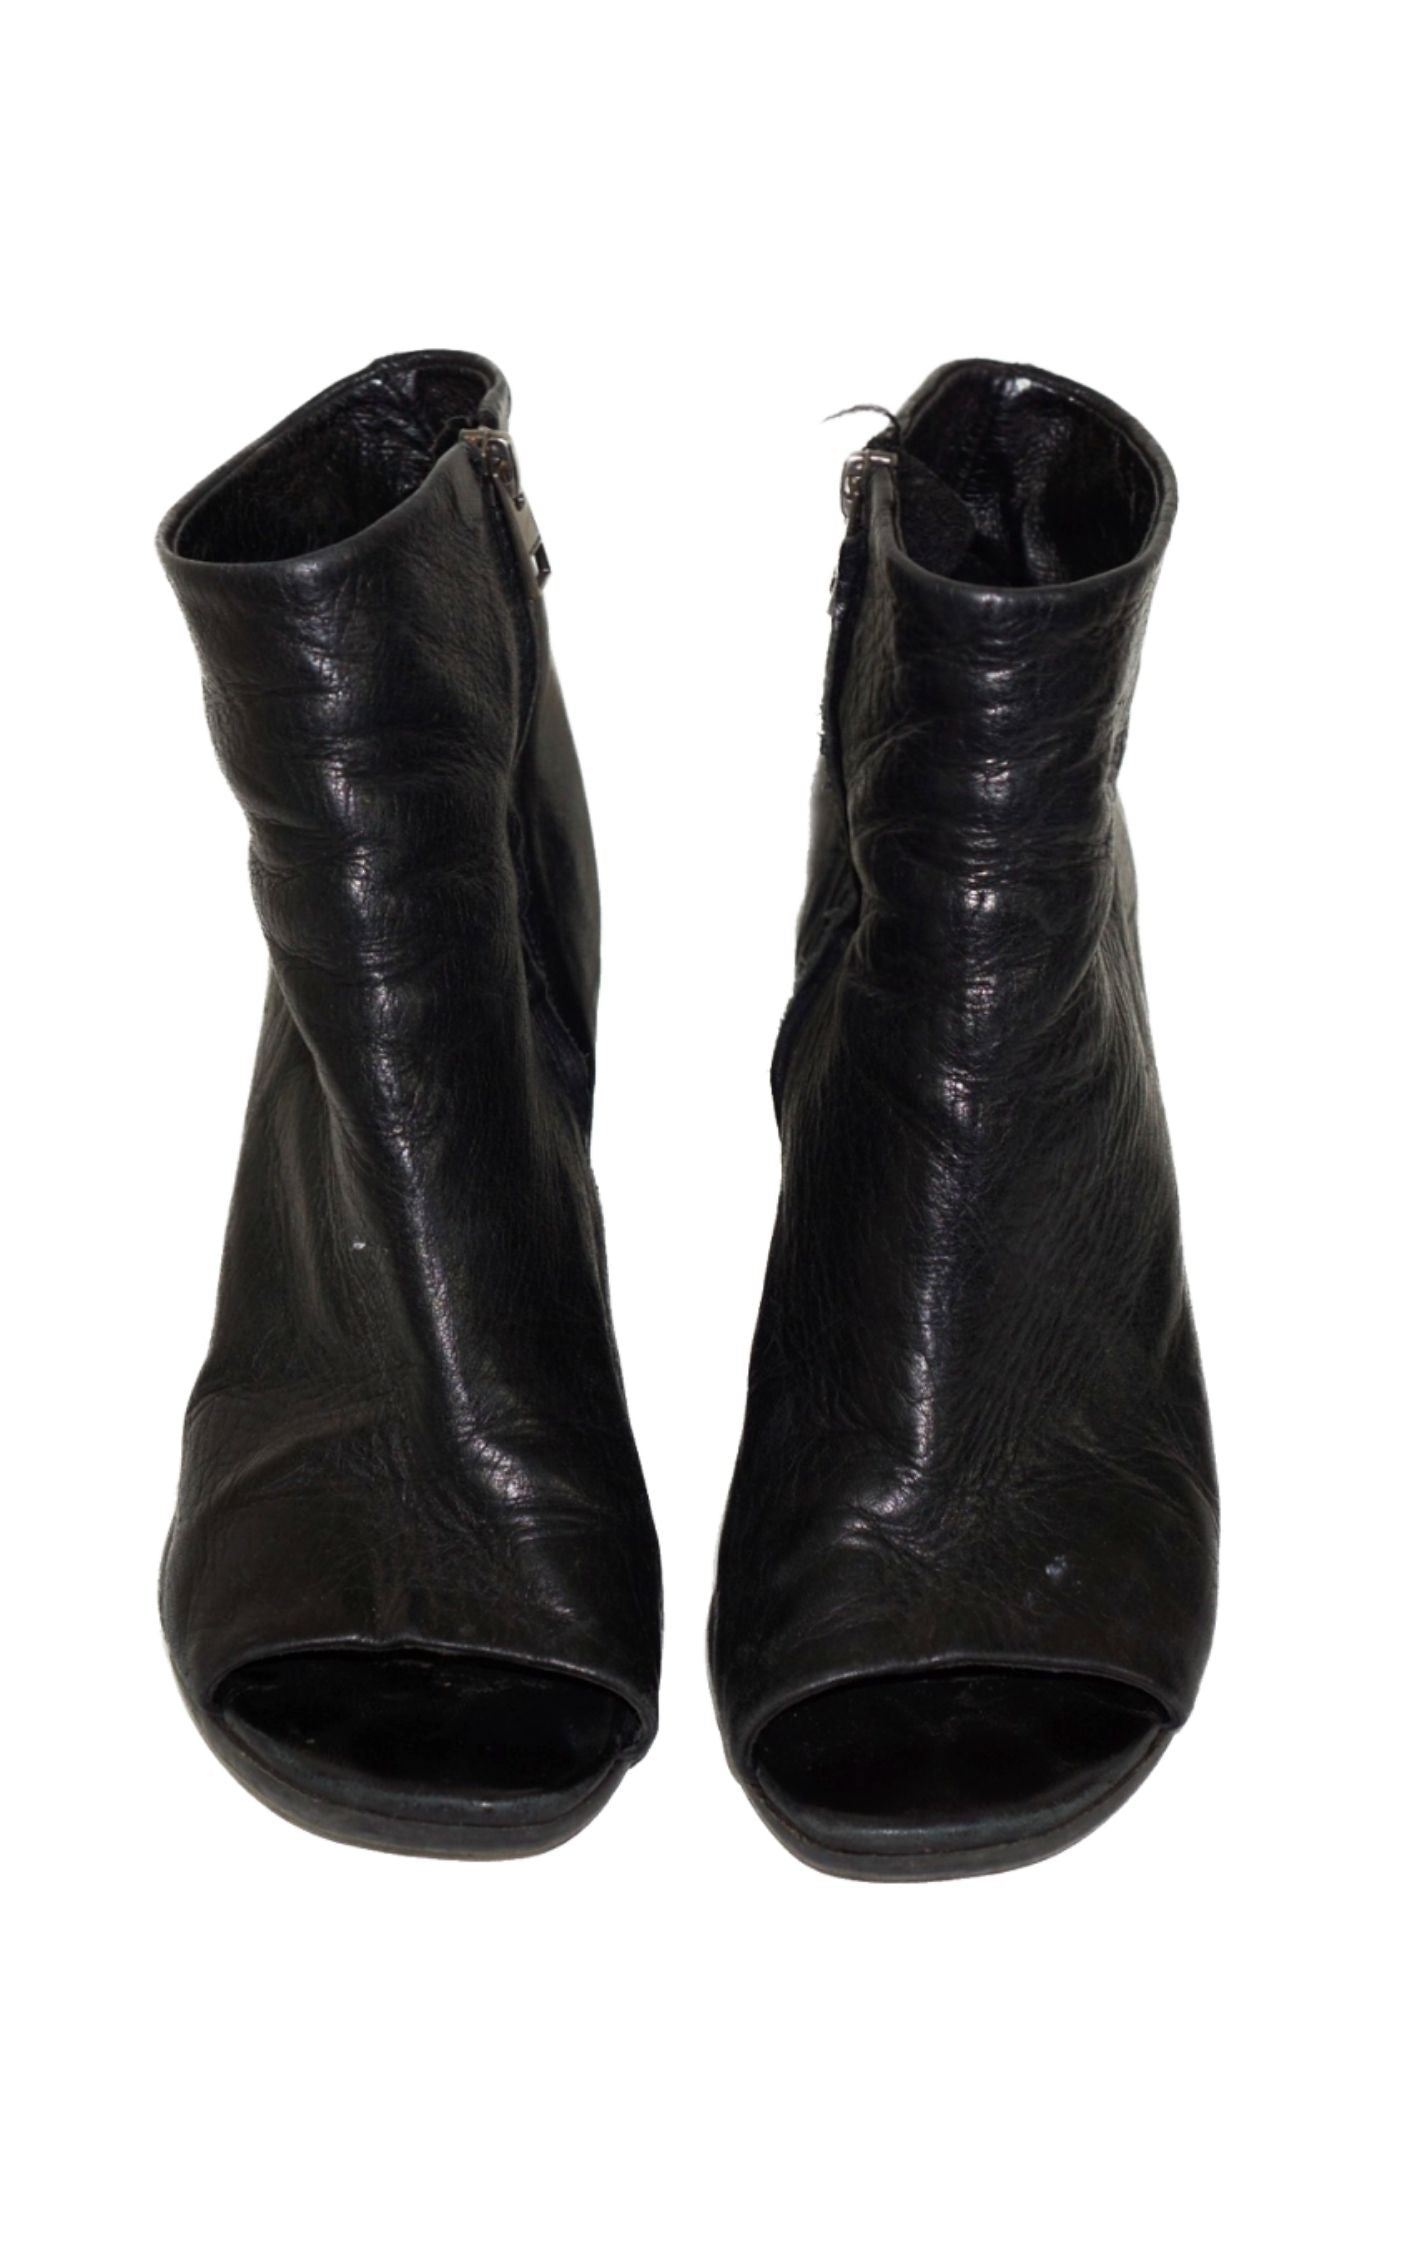 ALL SAINTS Open Toe Leather Wedge Boots